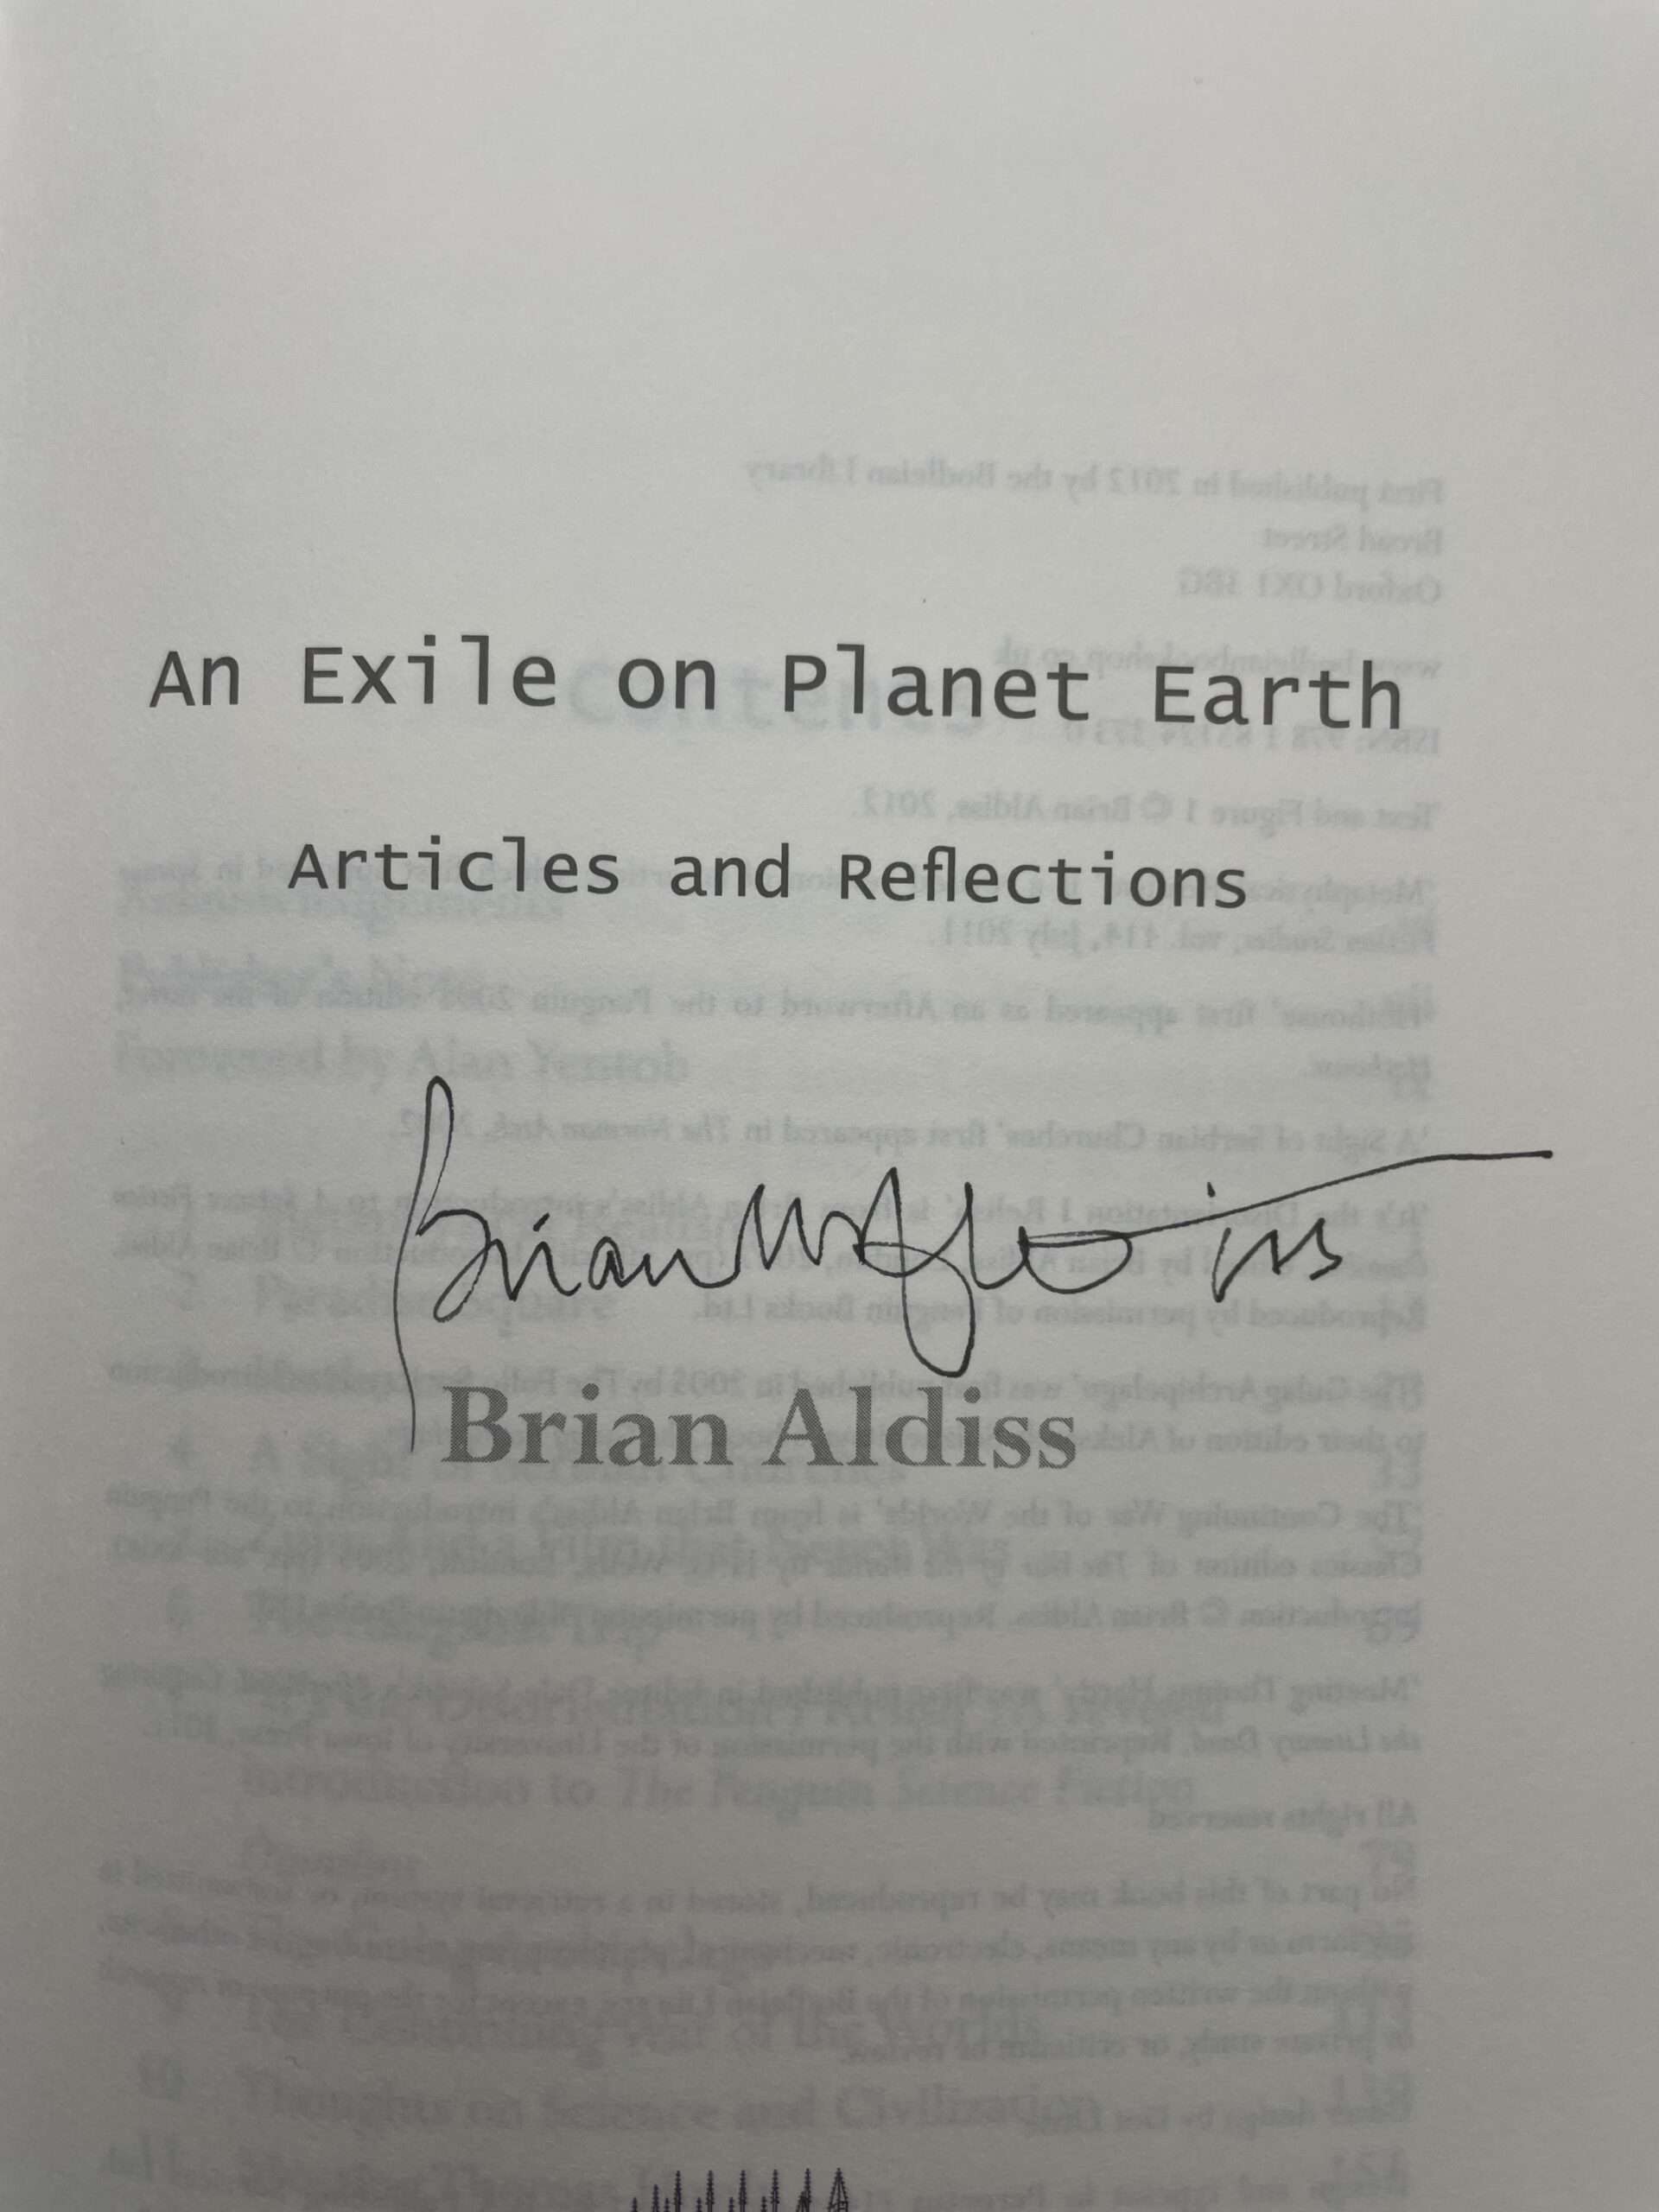 brian aldiss an exile on planet earth signed2